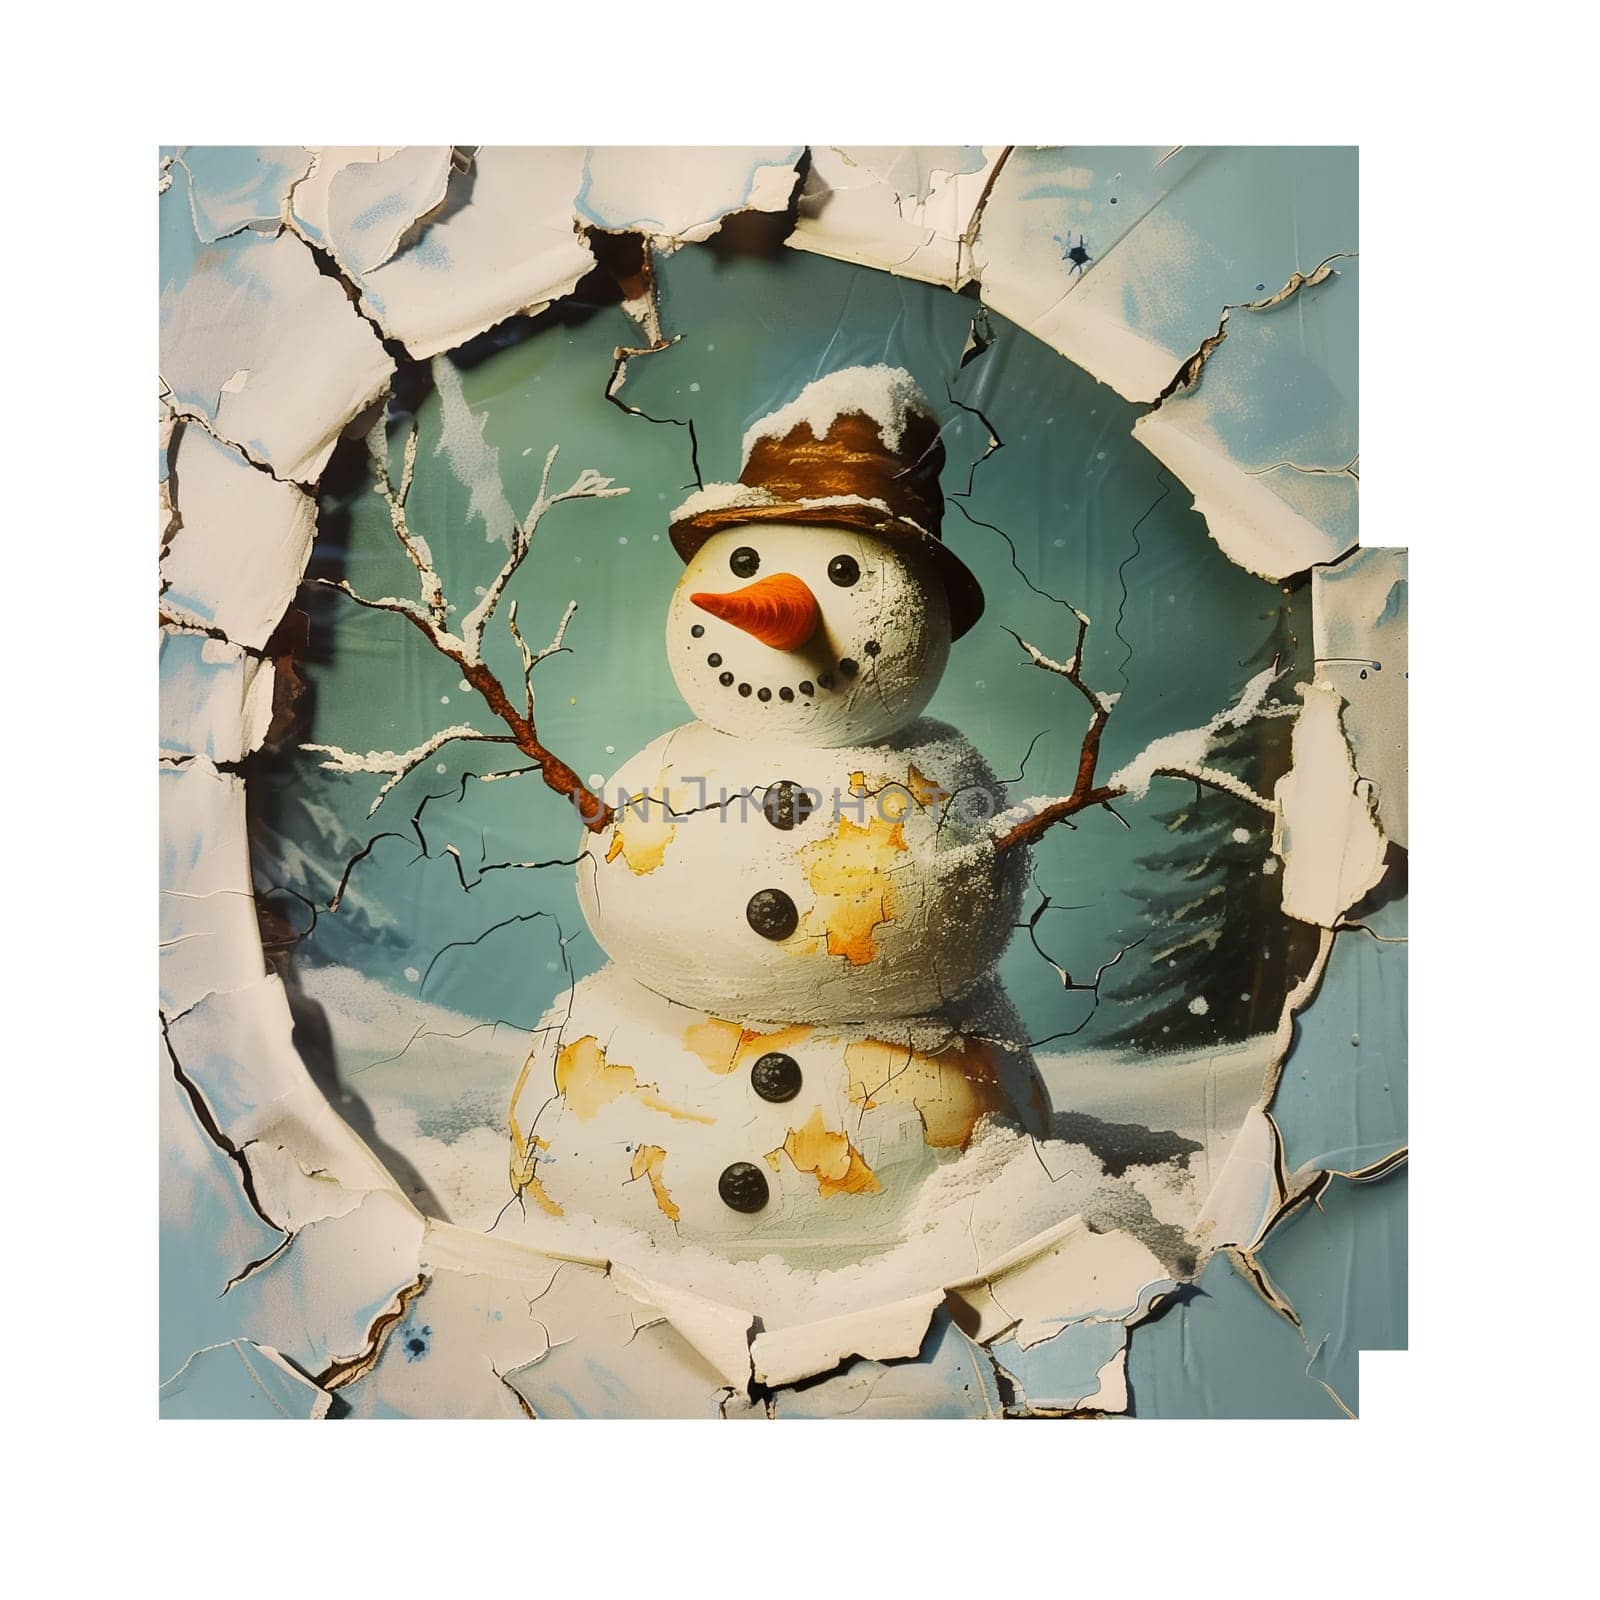 Christmas snowman cut out old fashioned warm photo by Dustick